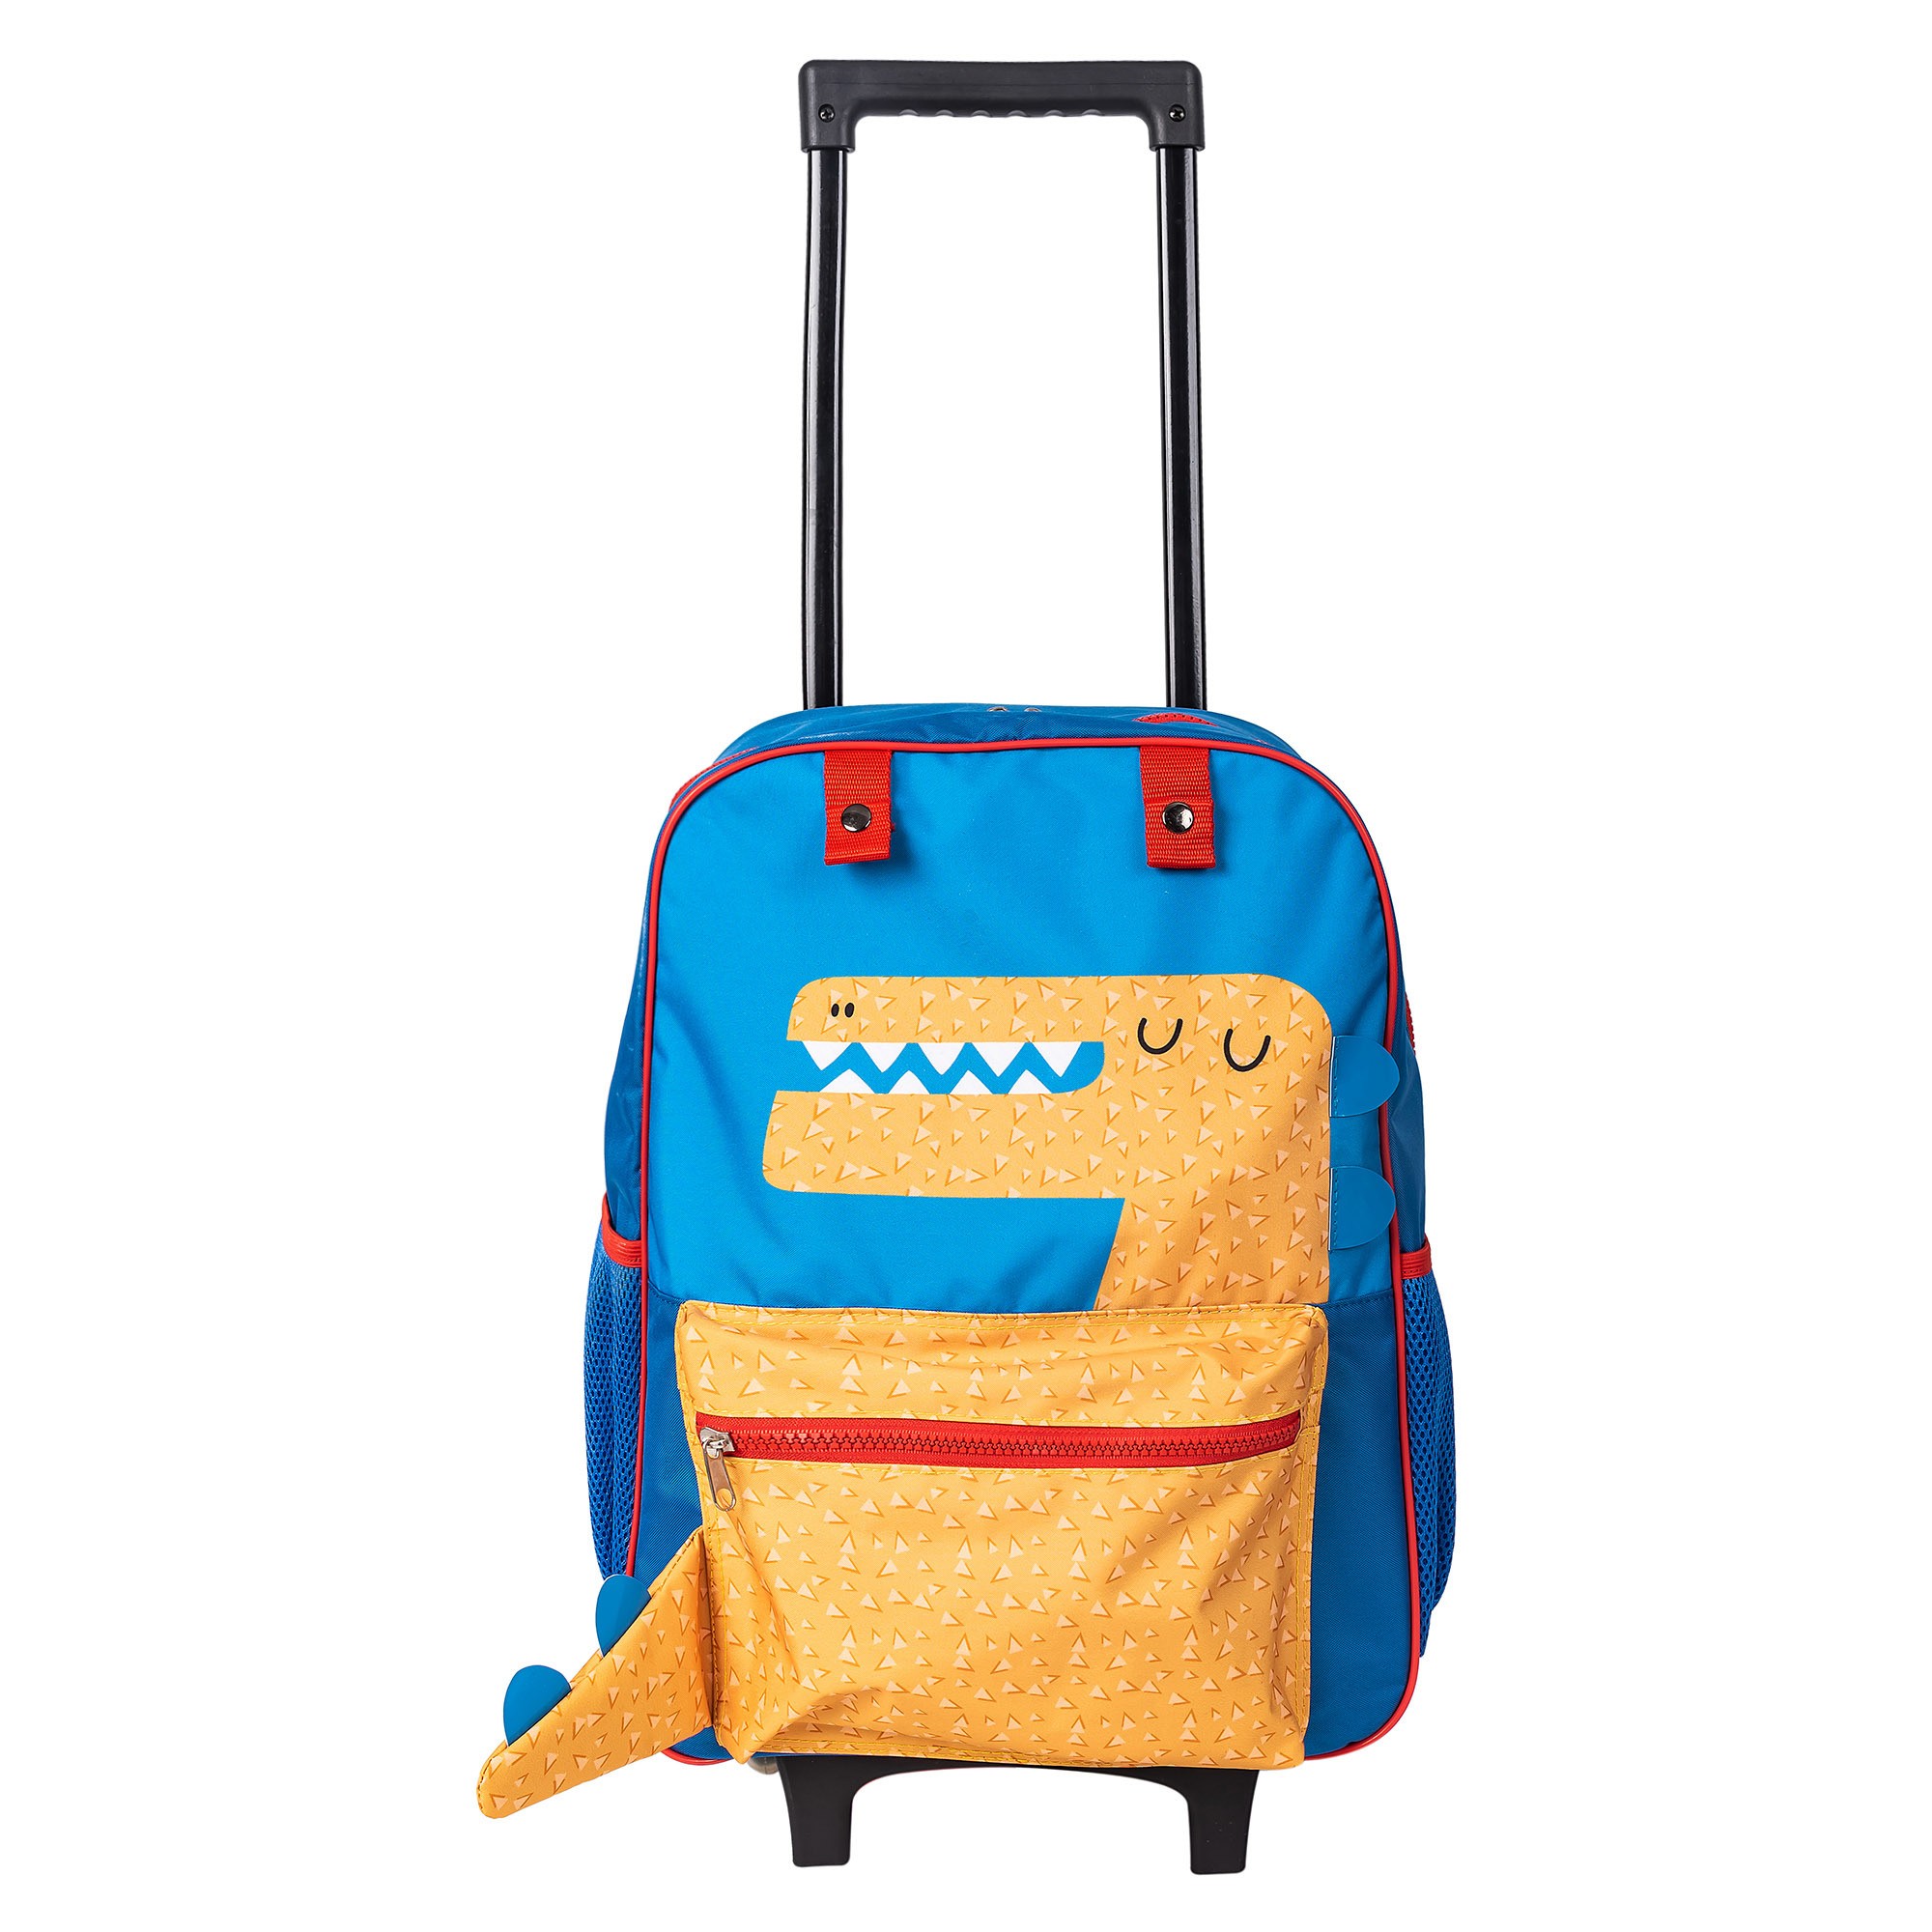 Customized Trolley School Bag Book Bag with Wheels with All Over Full Printing